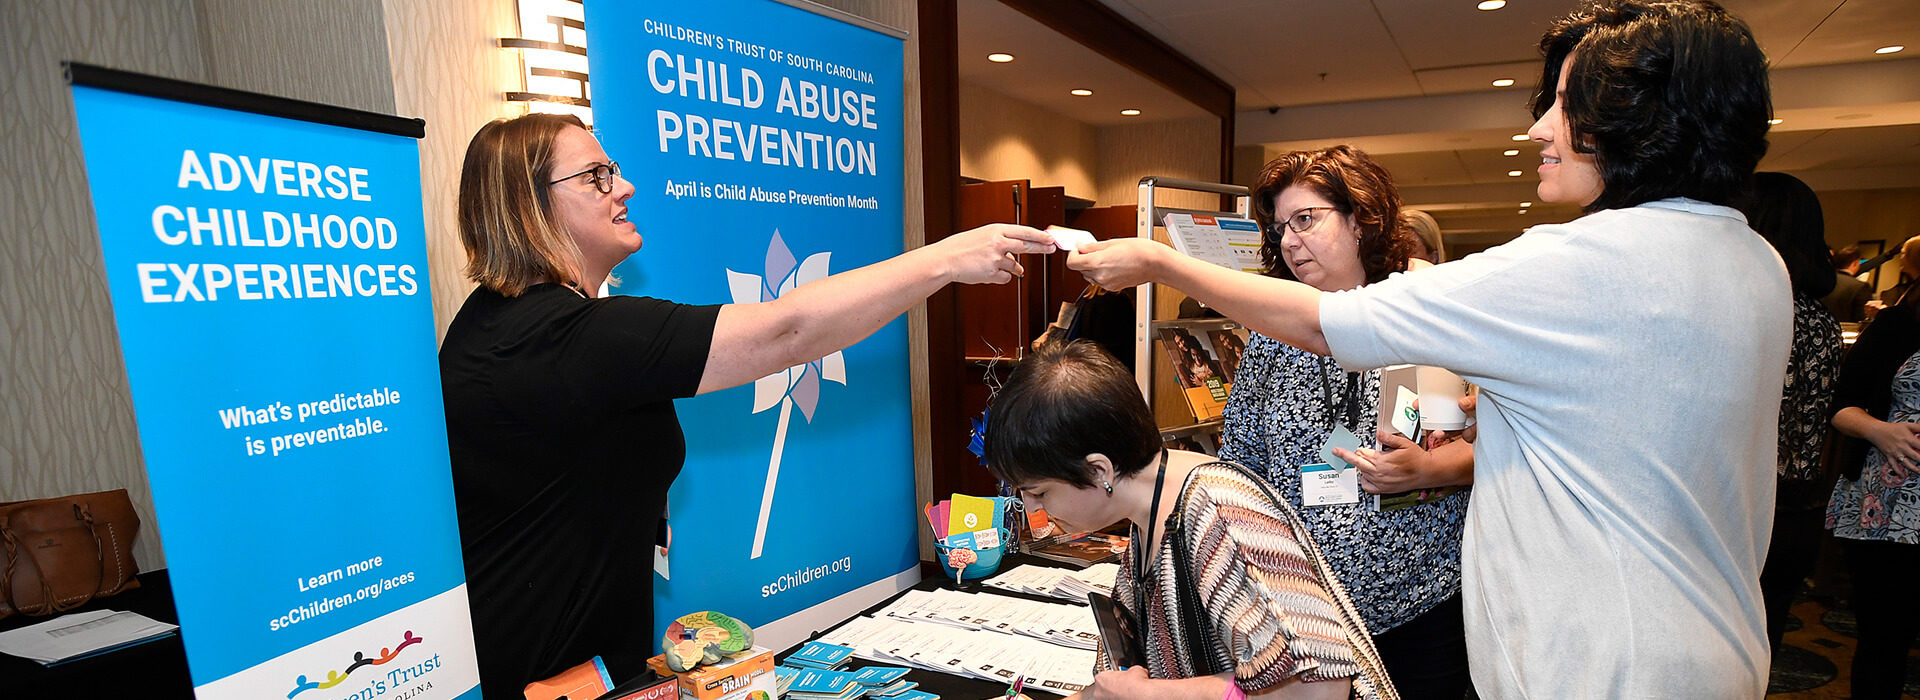 Providing resources at Building Hope for Children Conference